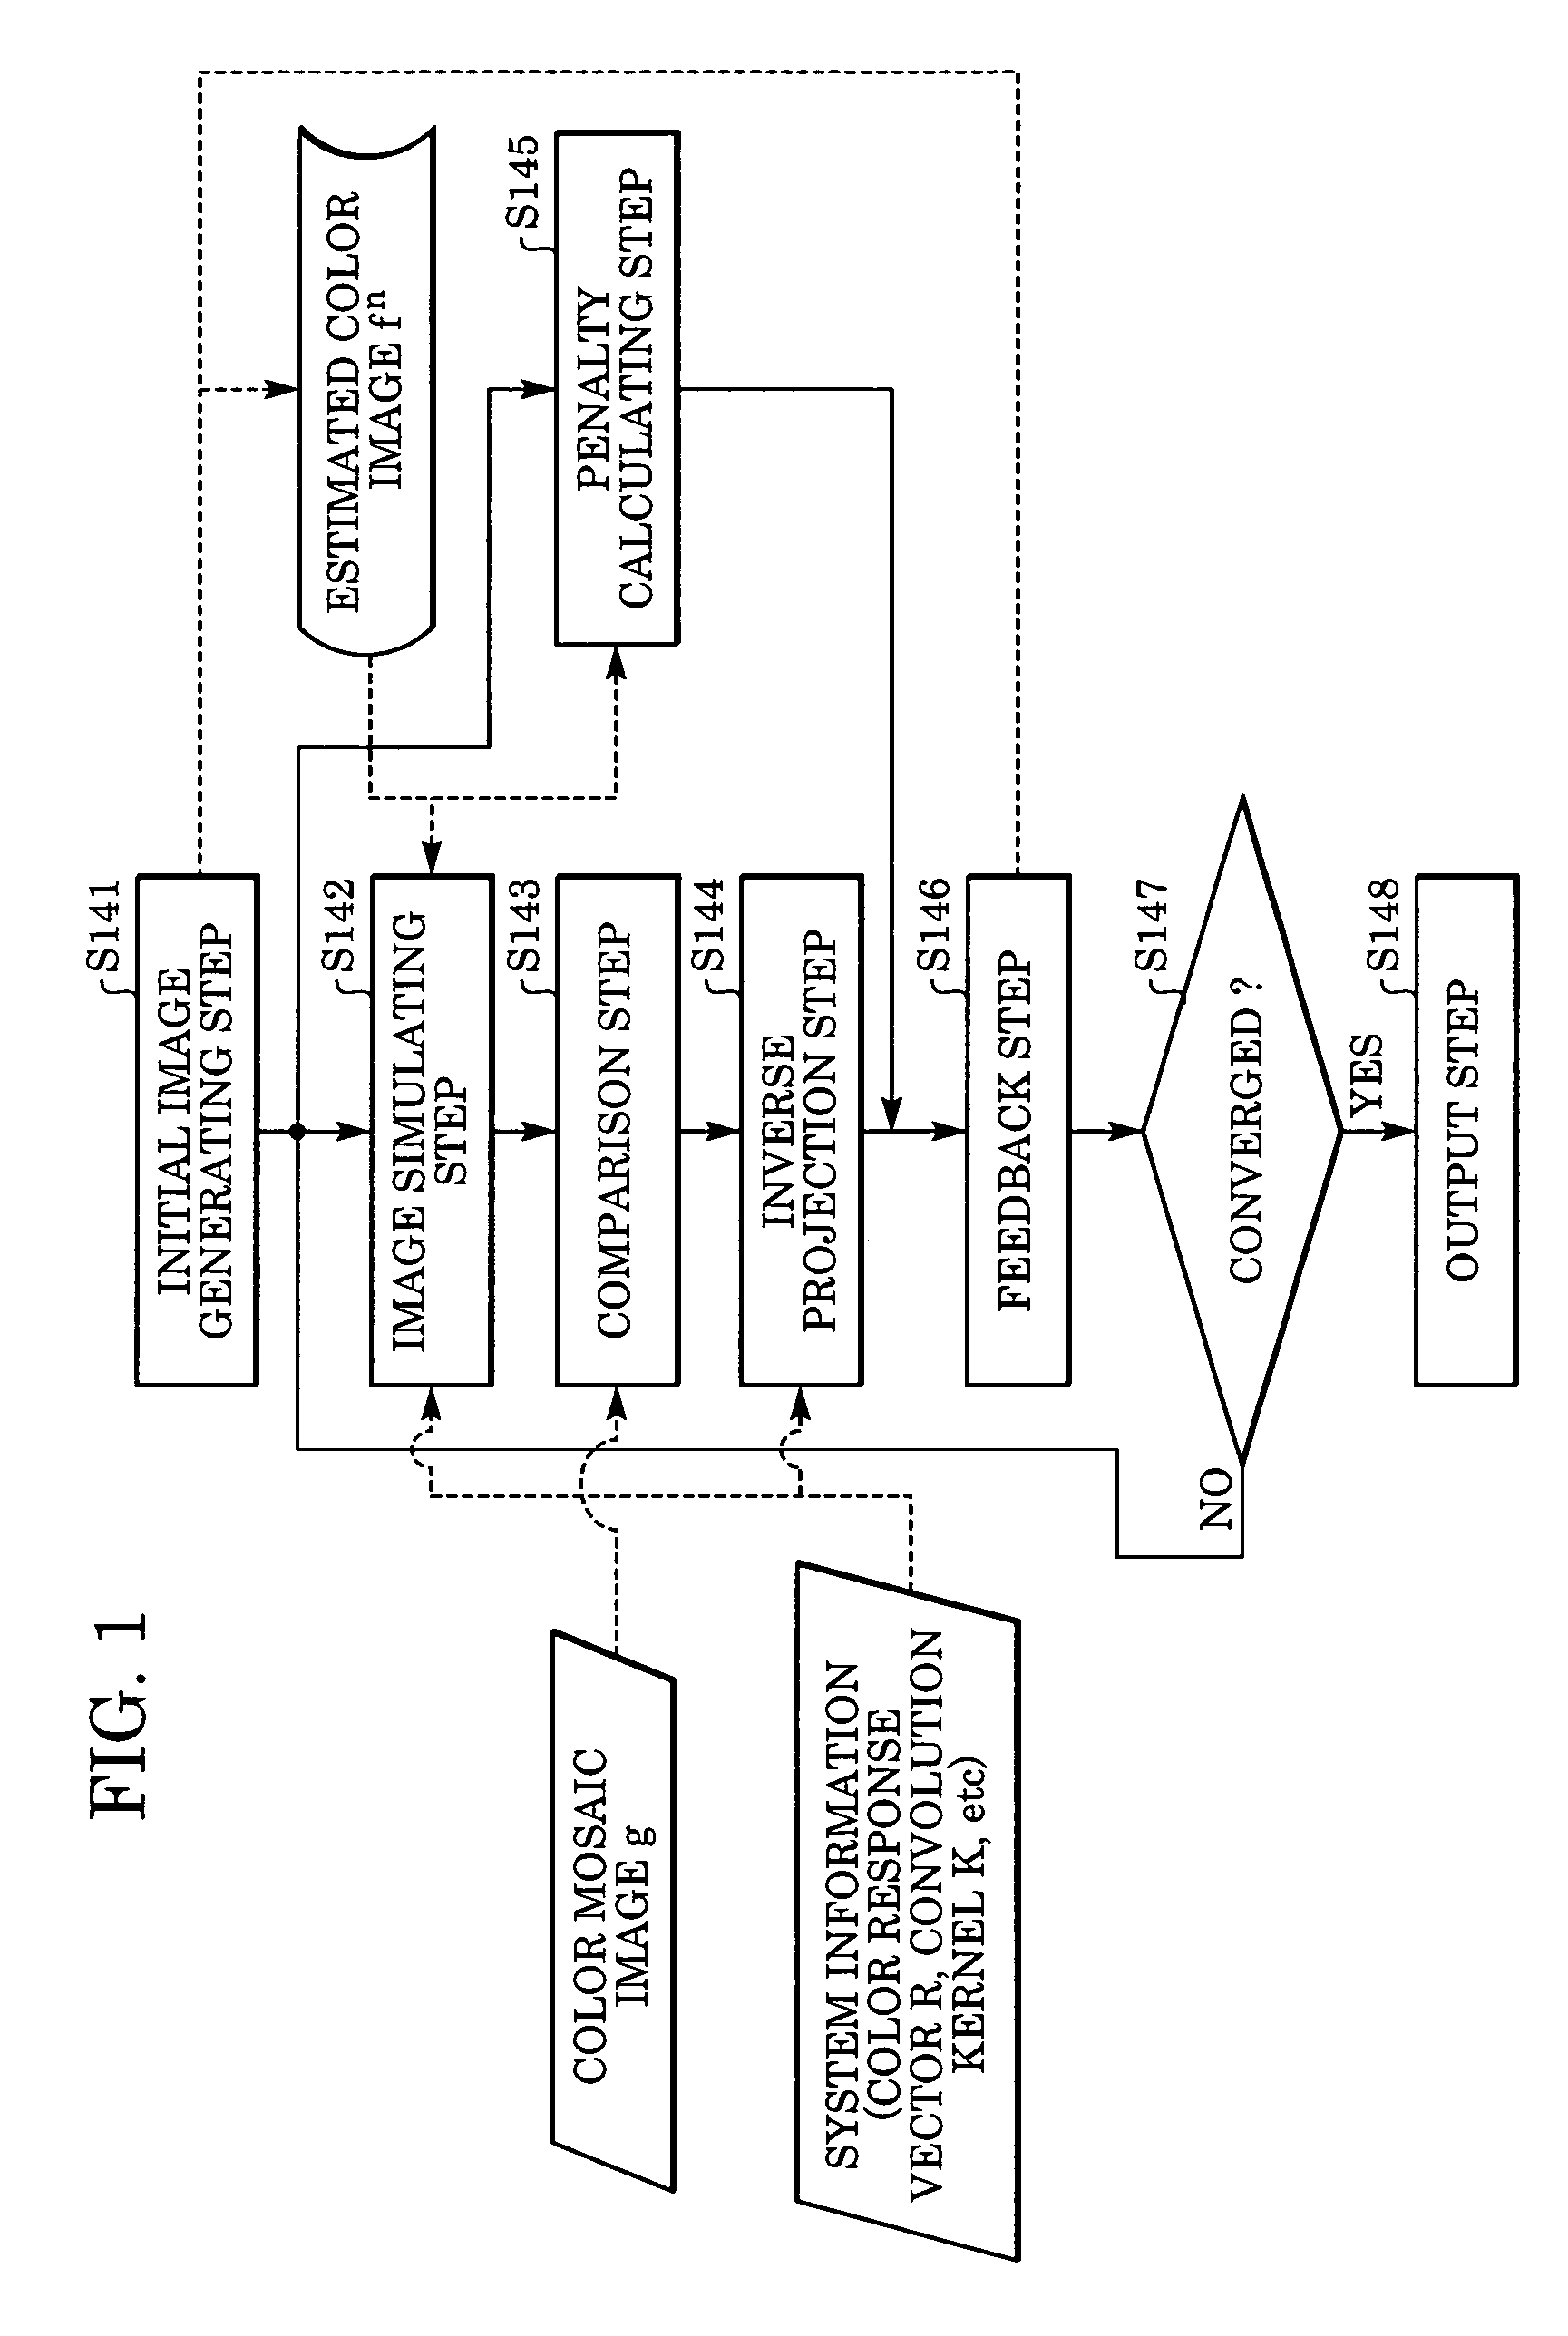 Image processing device, image processing method and image processing program